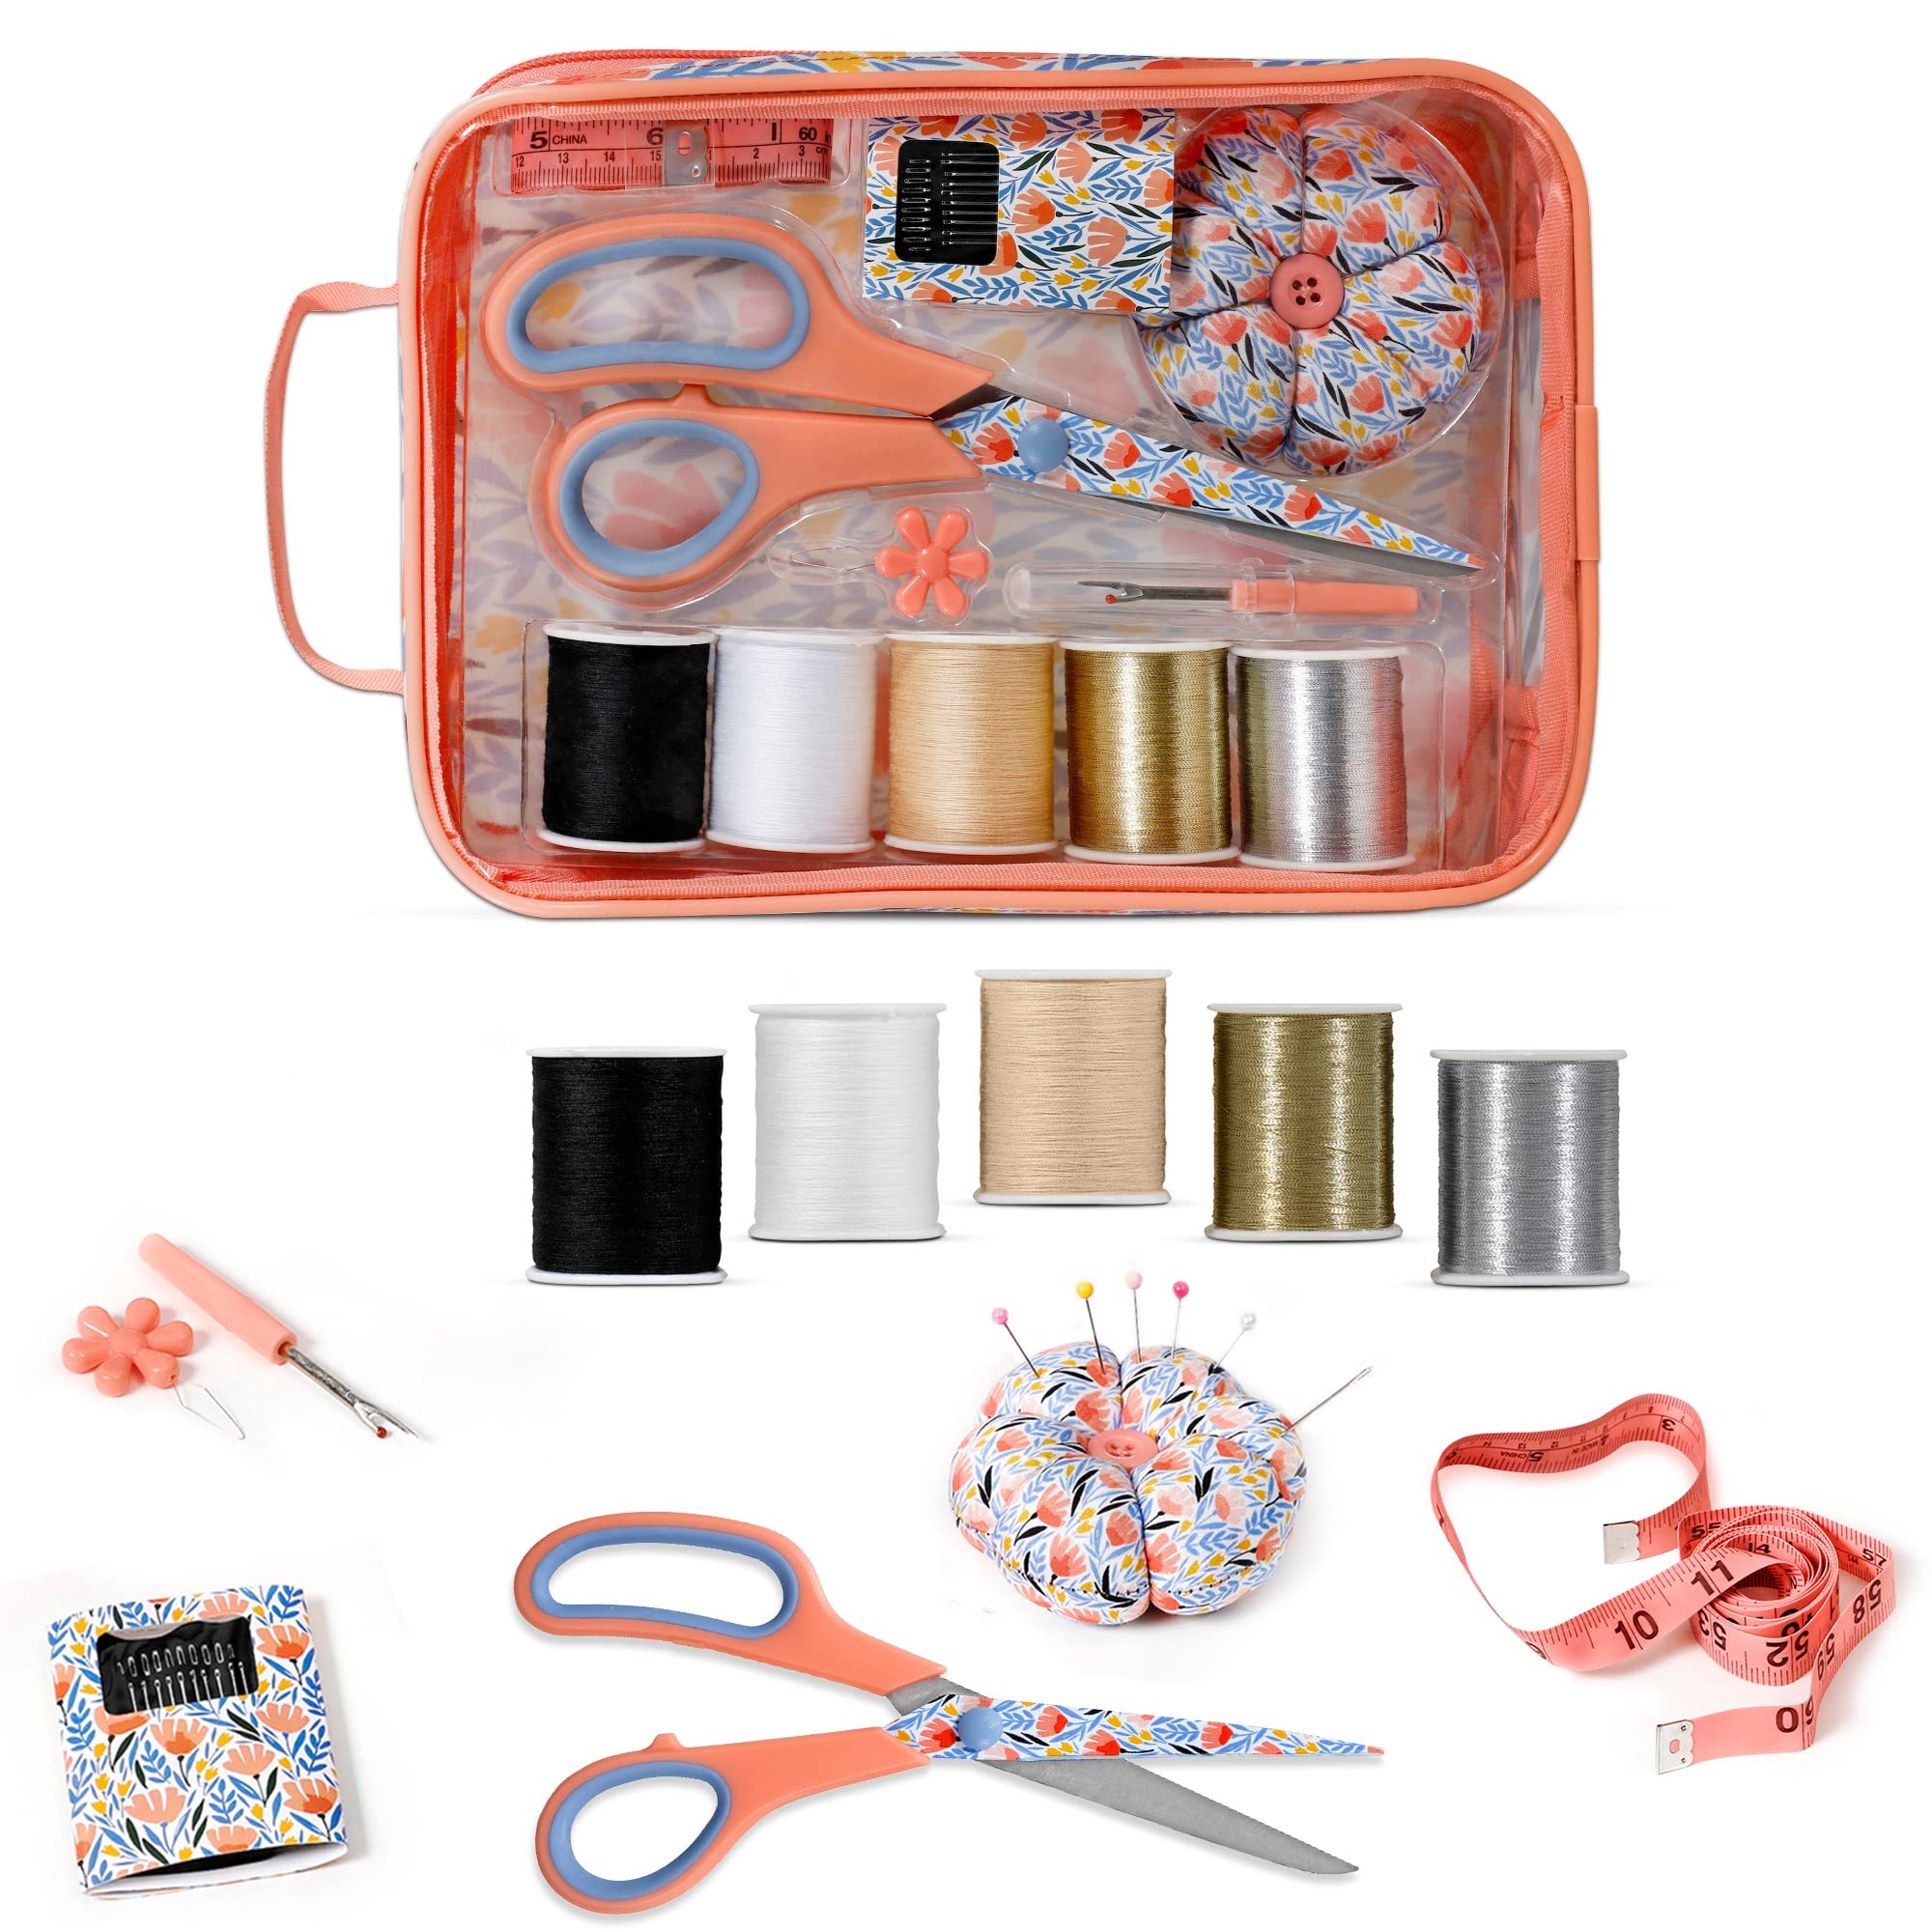 SINGER Sewing Kit in Tulip Floral Storage Bag with 30 Pcs Sewing Supplies for Emergency, Clothing Repair, Travel, Dormroom